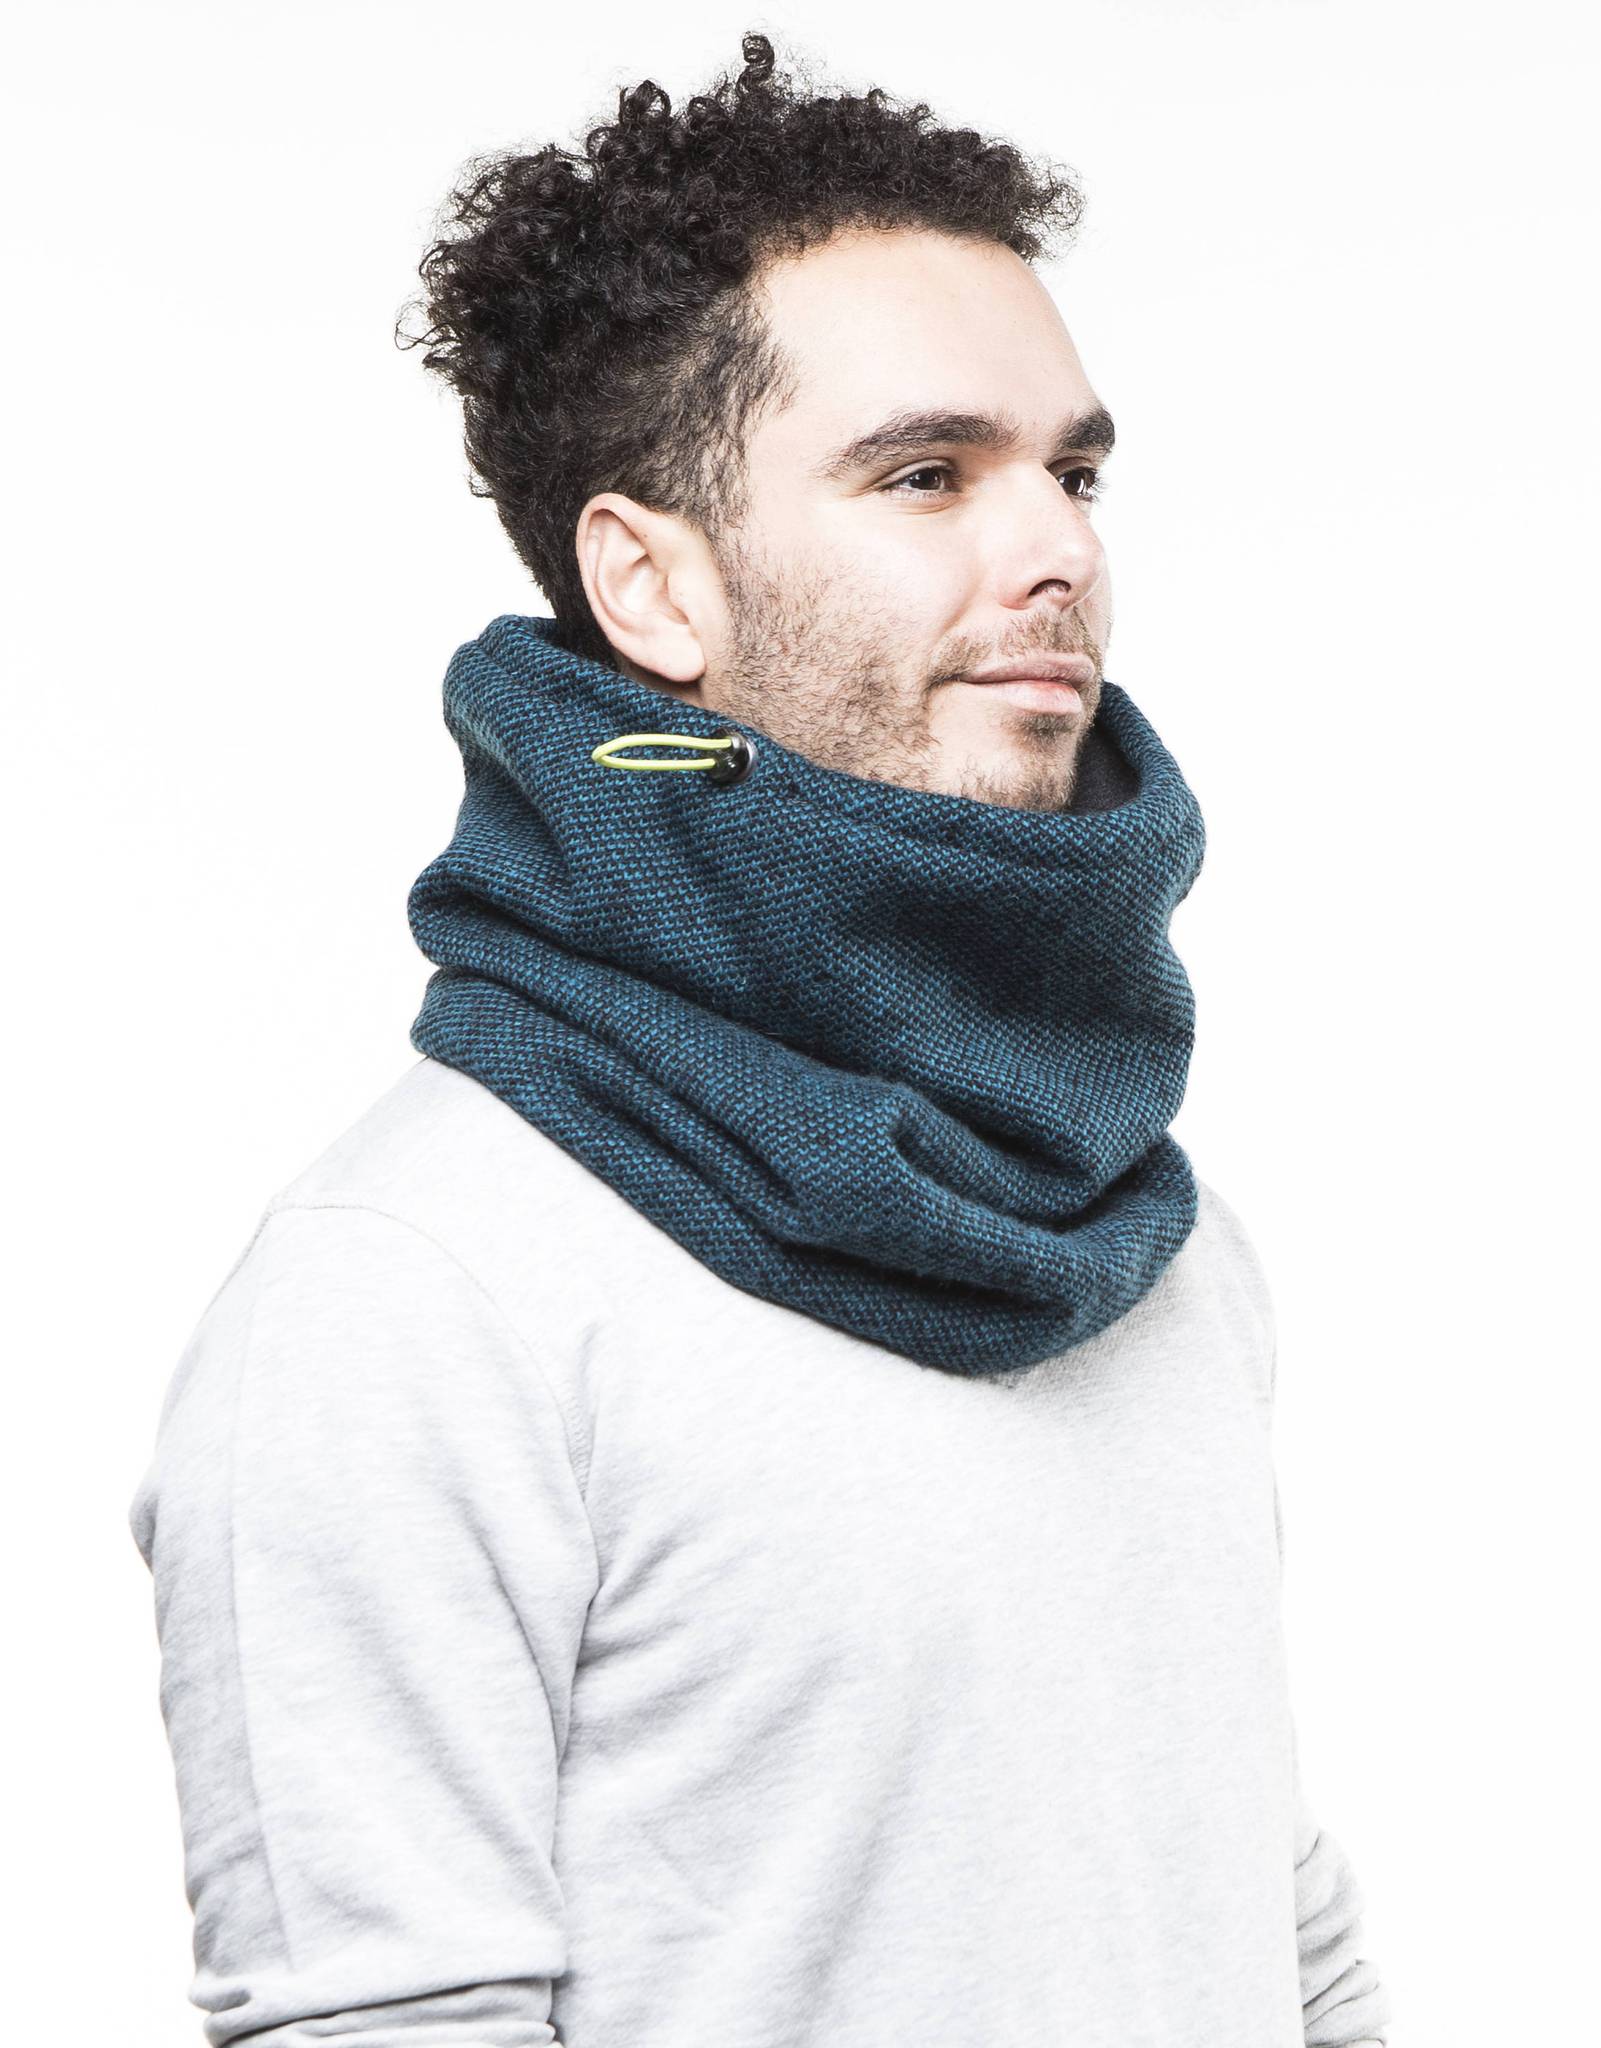 Unisex cowl scarf young man scarf gift idea teen mens scarf snock ...